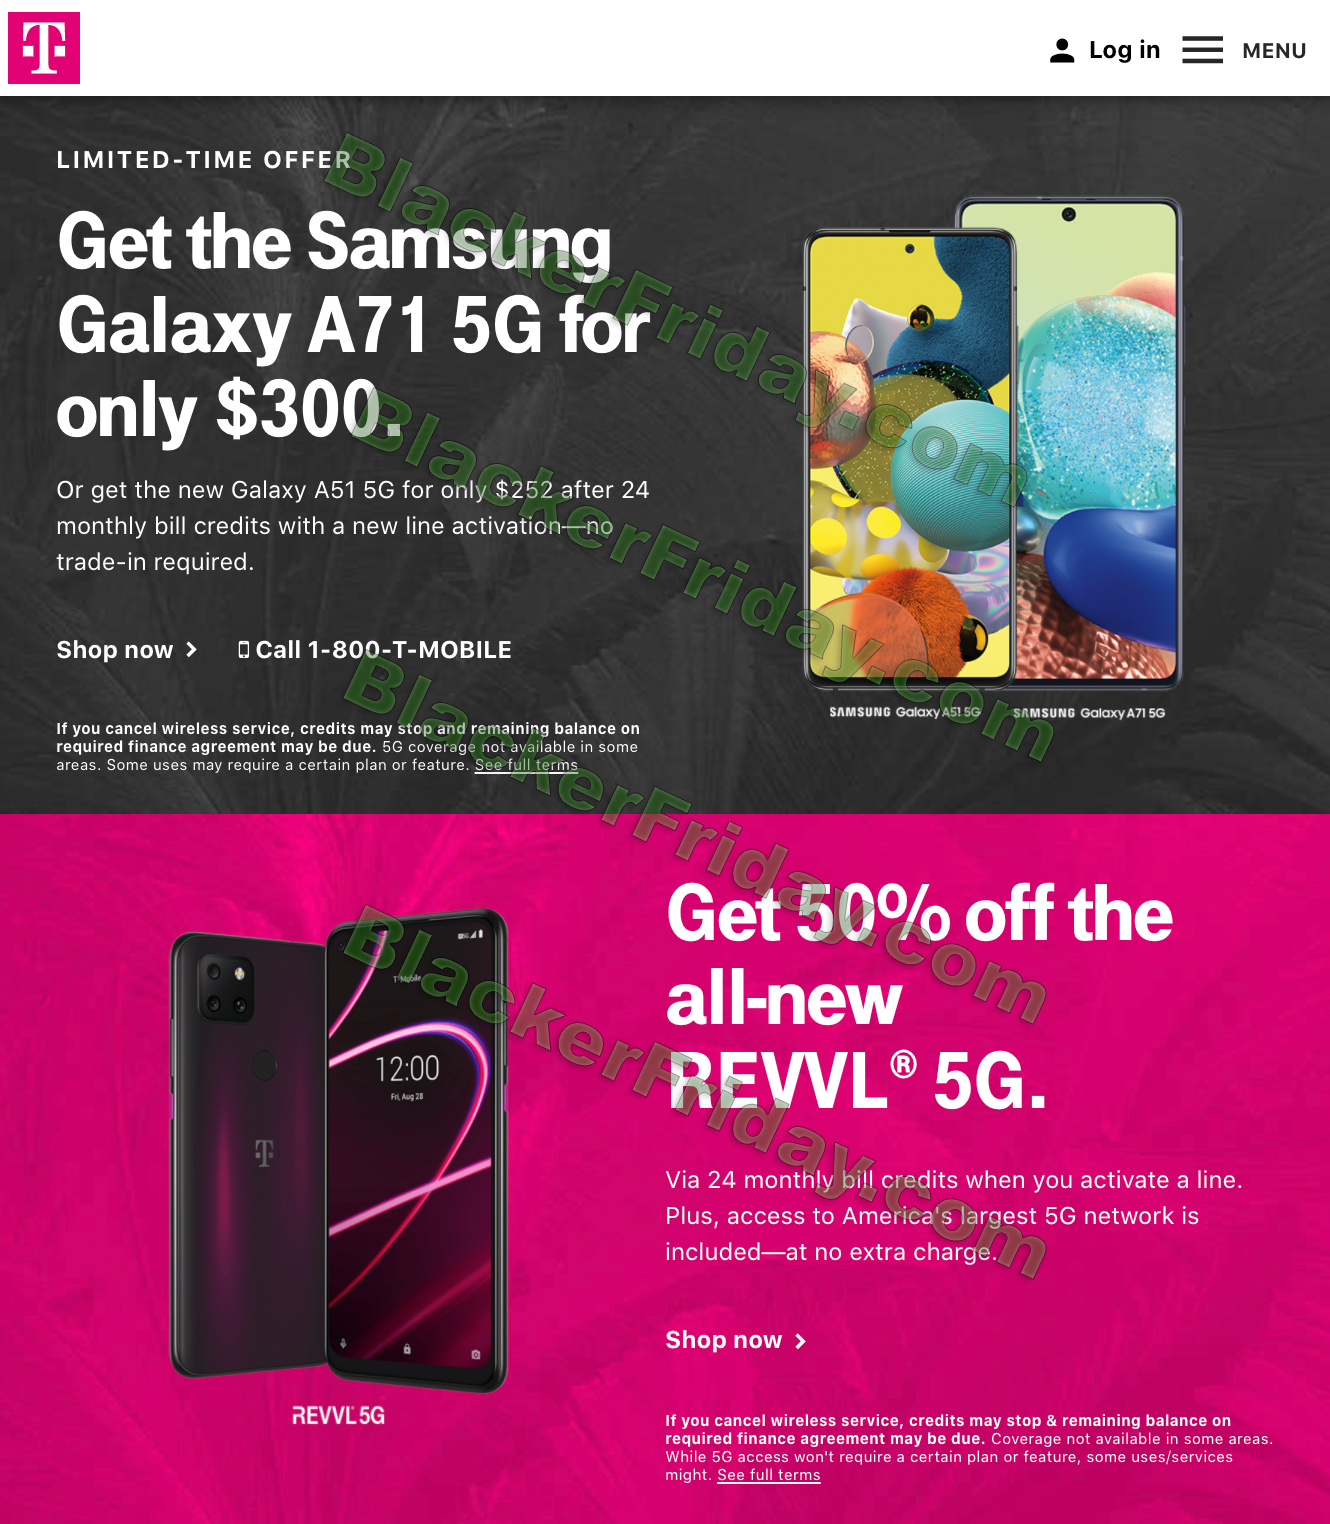 T-Mobile Black Friday 2021 Sale - What to Expect - Blacker Friday - What Is Tmobile Planning For 2021 Black Friday Sale